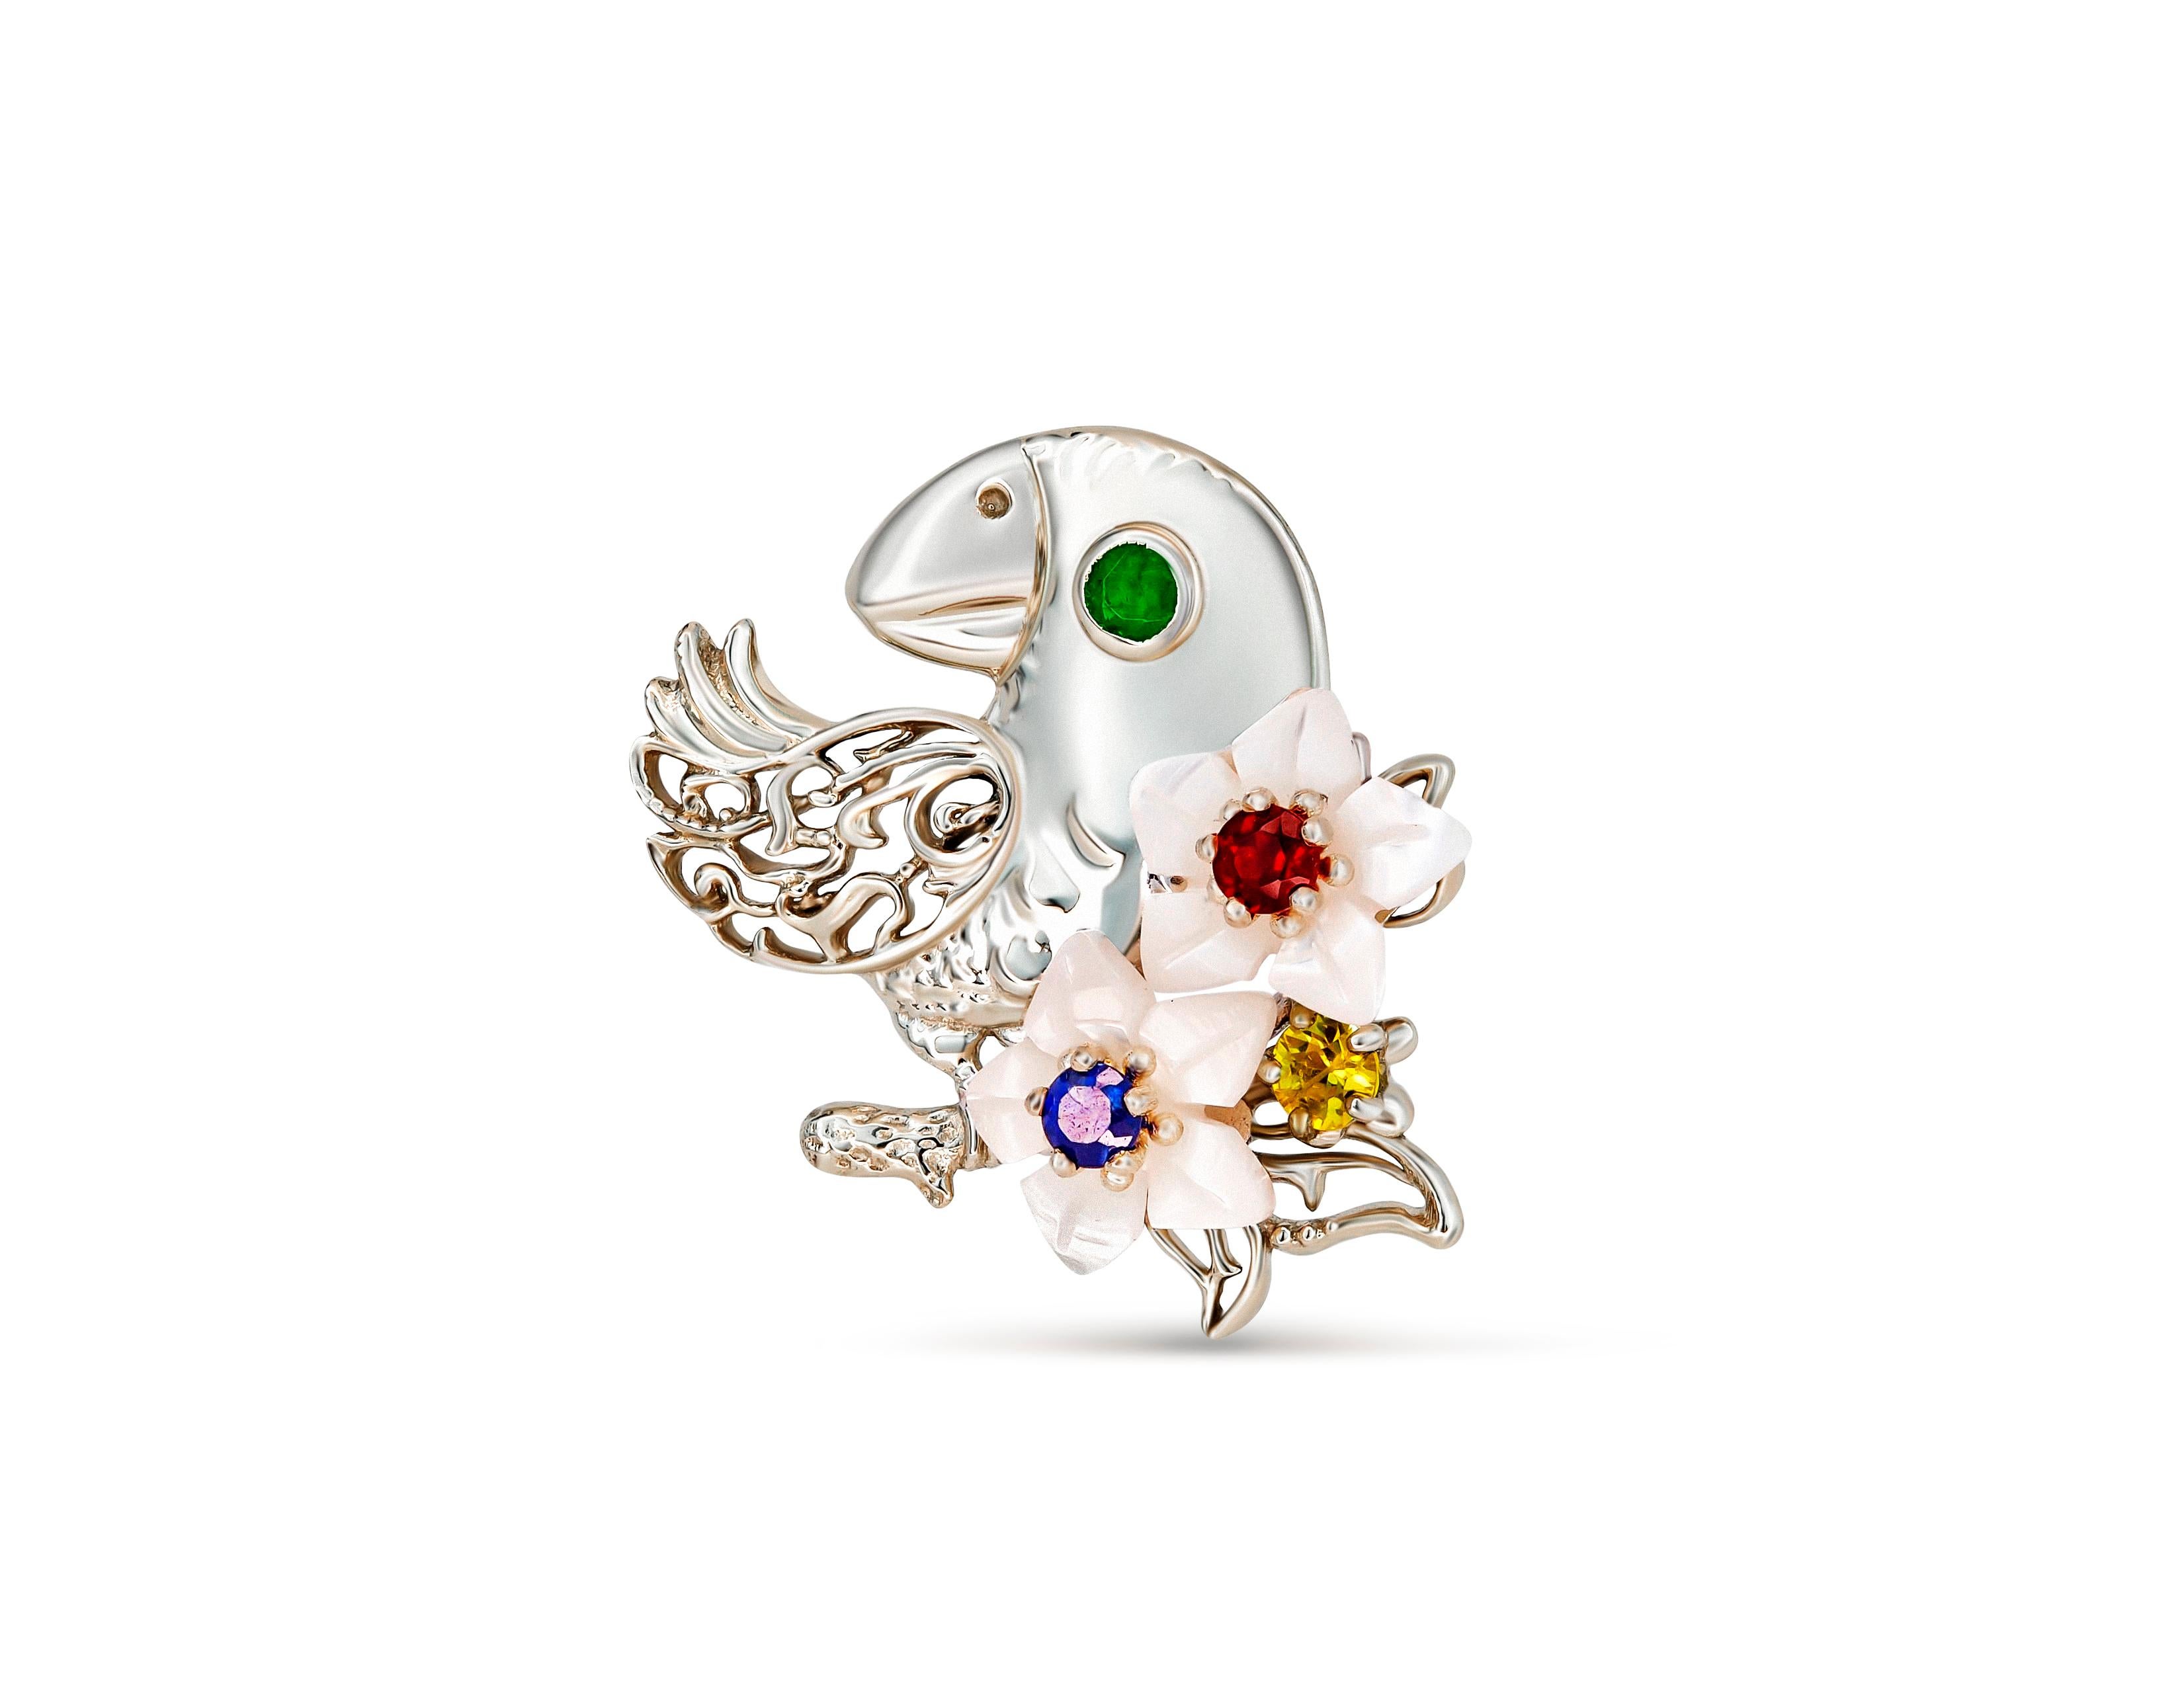 Parrot on flower pendant with colored gems. 
Emerald, sapphires, ruby 14k gold pendant. Bird, Cockatoo pendant. Carved shell flower pendant.

Metal: 14k gold
18.9x23.2 mm size
Weight 2.40 gr (pure gold weight - 2.2 gr)

Gemstones:
Emerald: green